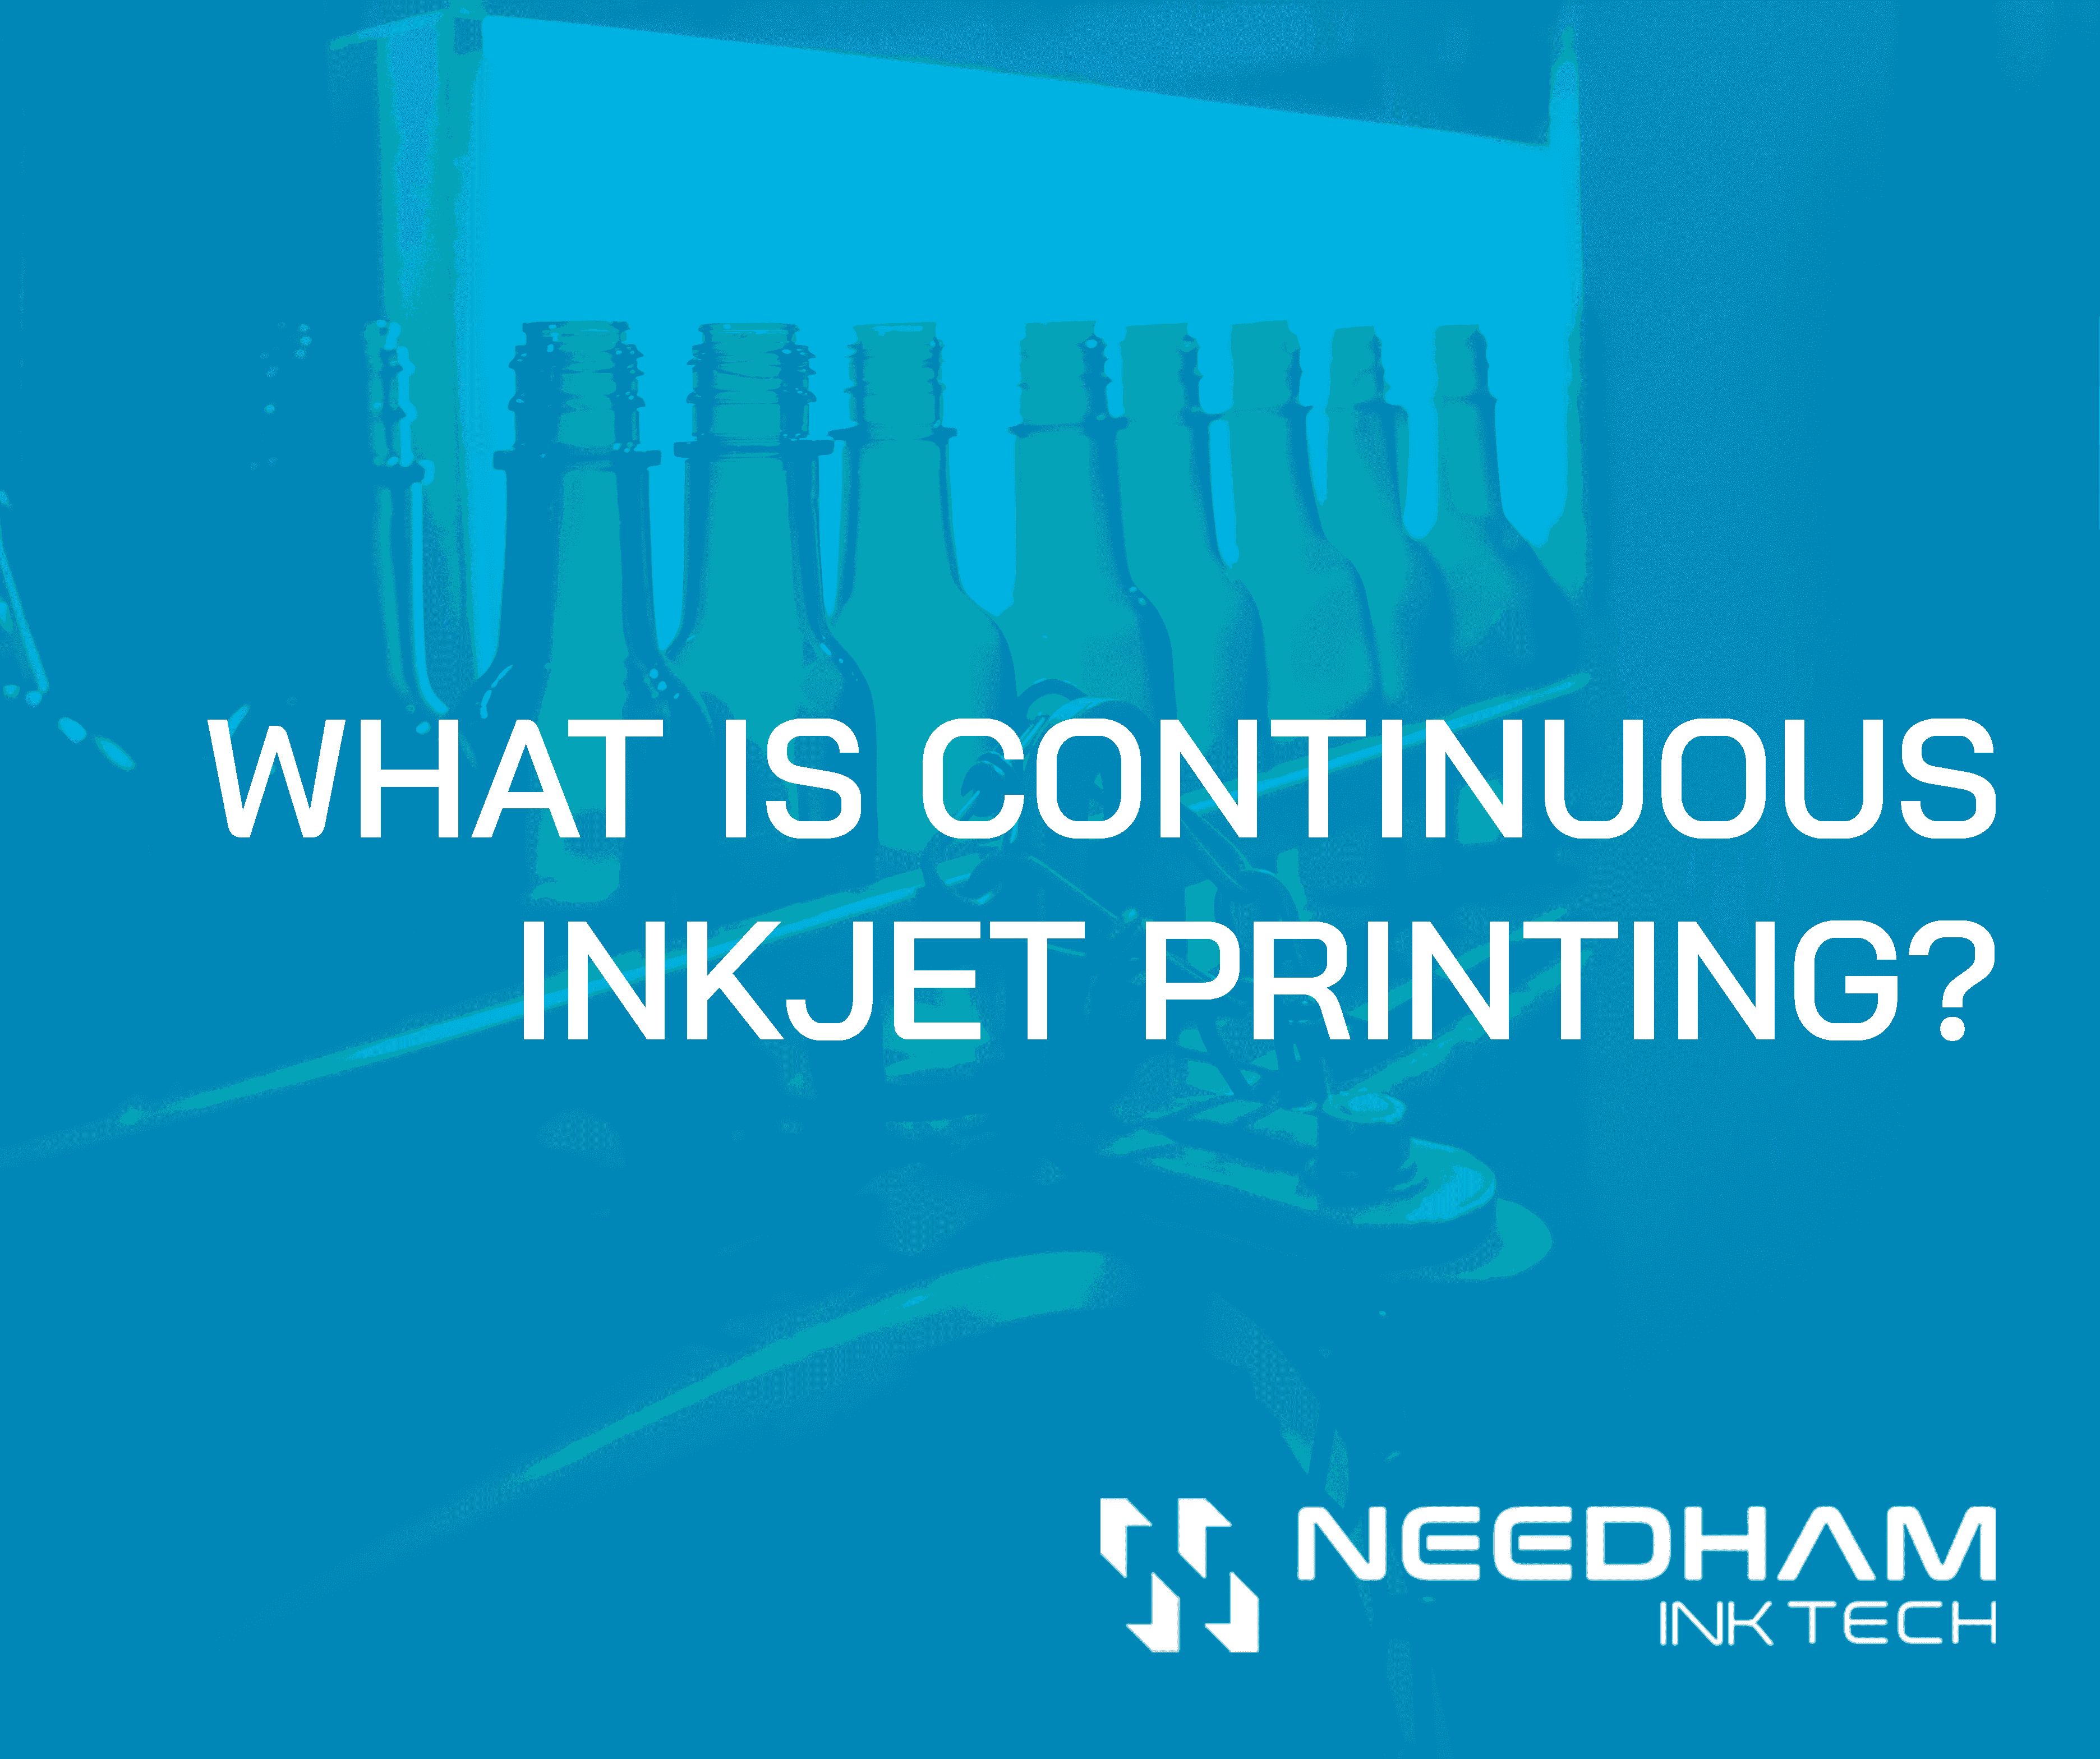 What is Continuous Inkjet Printing?